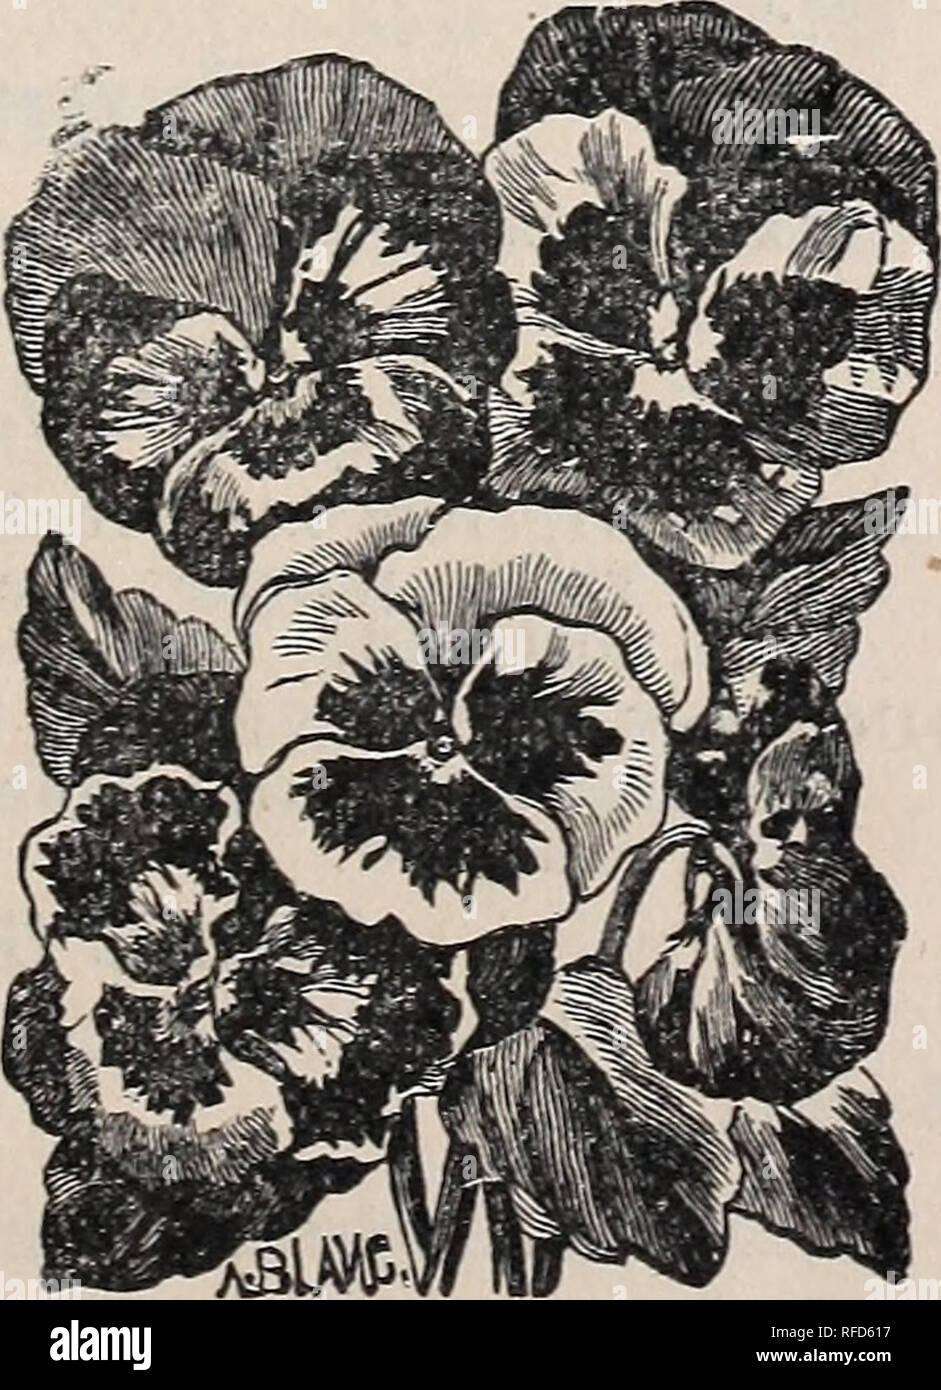 . Fifteenth annual rural guide and seed catalogue. Nursery stock, Missouri, Carthage, Catalogs; Vegetables, Seeds, Catalogs; Flowers, Seeds, Catalogs; Grasses, Seeds, Catalogs; Agricultural implements, Catalogs. Phlox, DRUMMONDII-Grandi- flora mixed, pkt 10c. COCCINEA. — Brilliant scarlet; pkt 10c. SPLENDID—Dwarf, bril- liant blood red; pkt 10c FINE MIXED—All col- ors. ALBA. —- White dwarf, mixed colors; 10c. Poppy, ray. CARNATION. Very brilliant flowers. ARCHIAS' EXTRA FAN- CY. Single, mixed col- ors. PENNY, flowered, doub- le mixed.. GERMAN MIXED PANSY. PETUNIA SINGLE. BLOTC HED and strined; Stock Photo